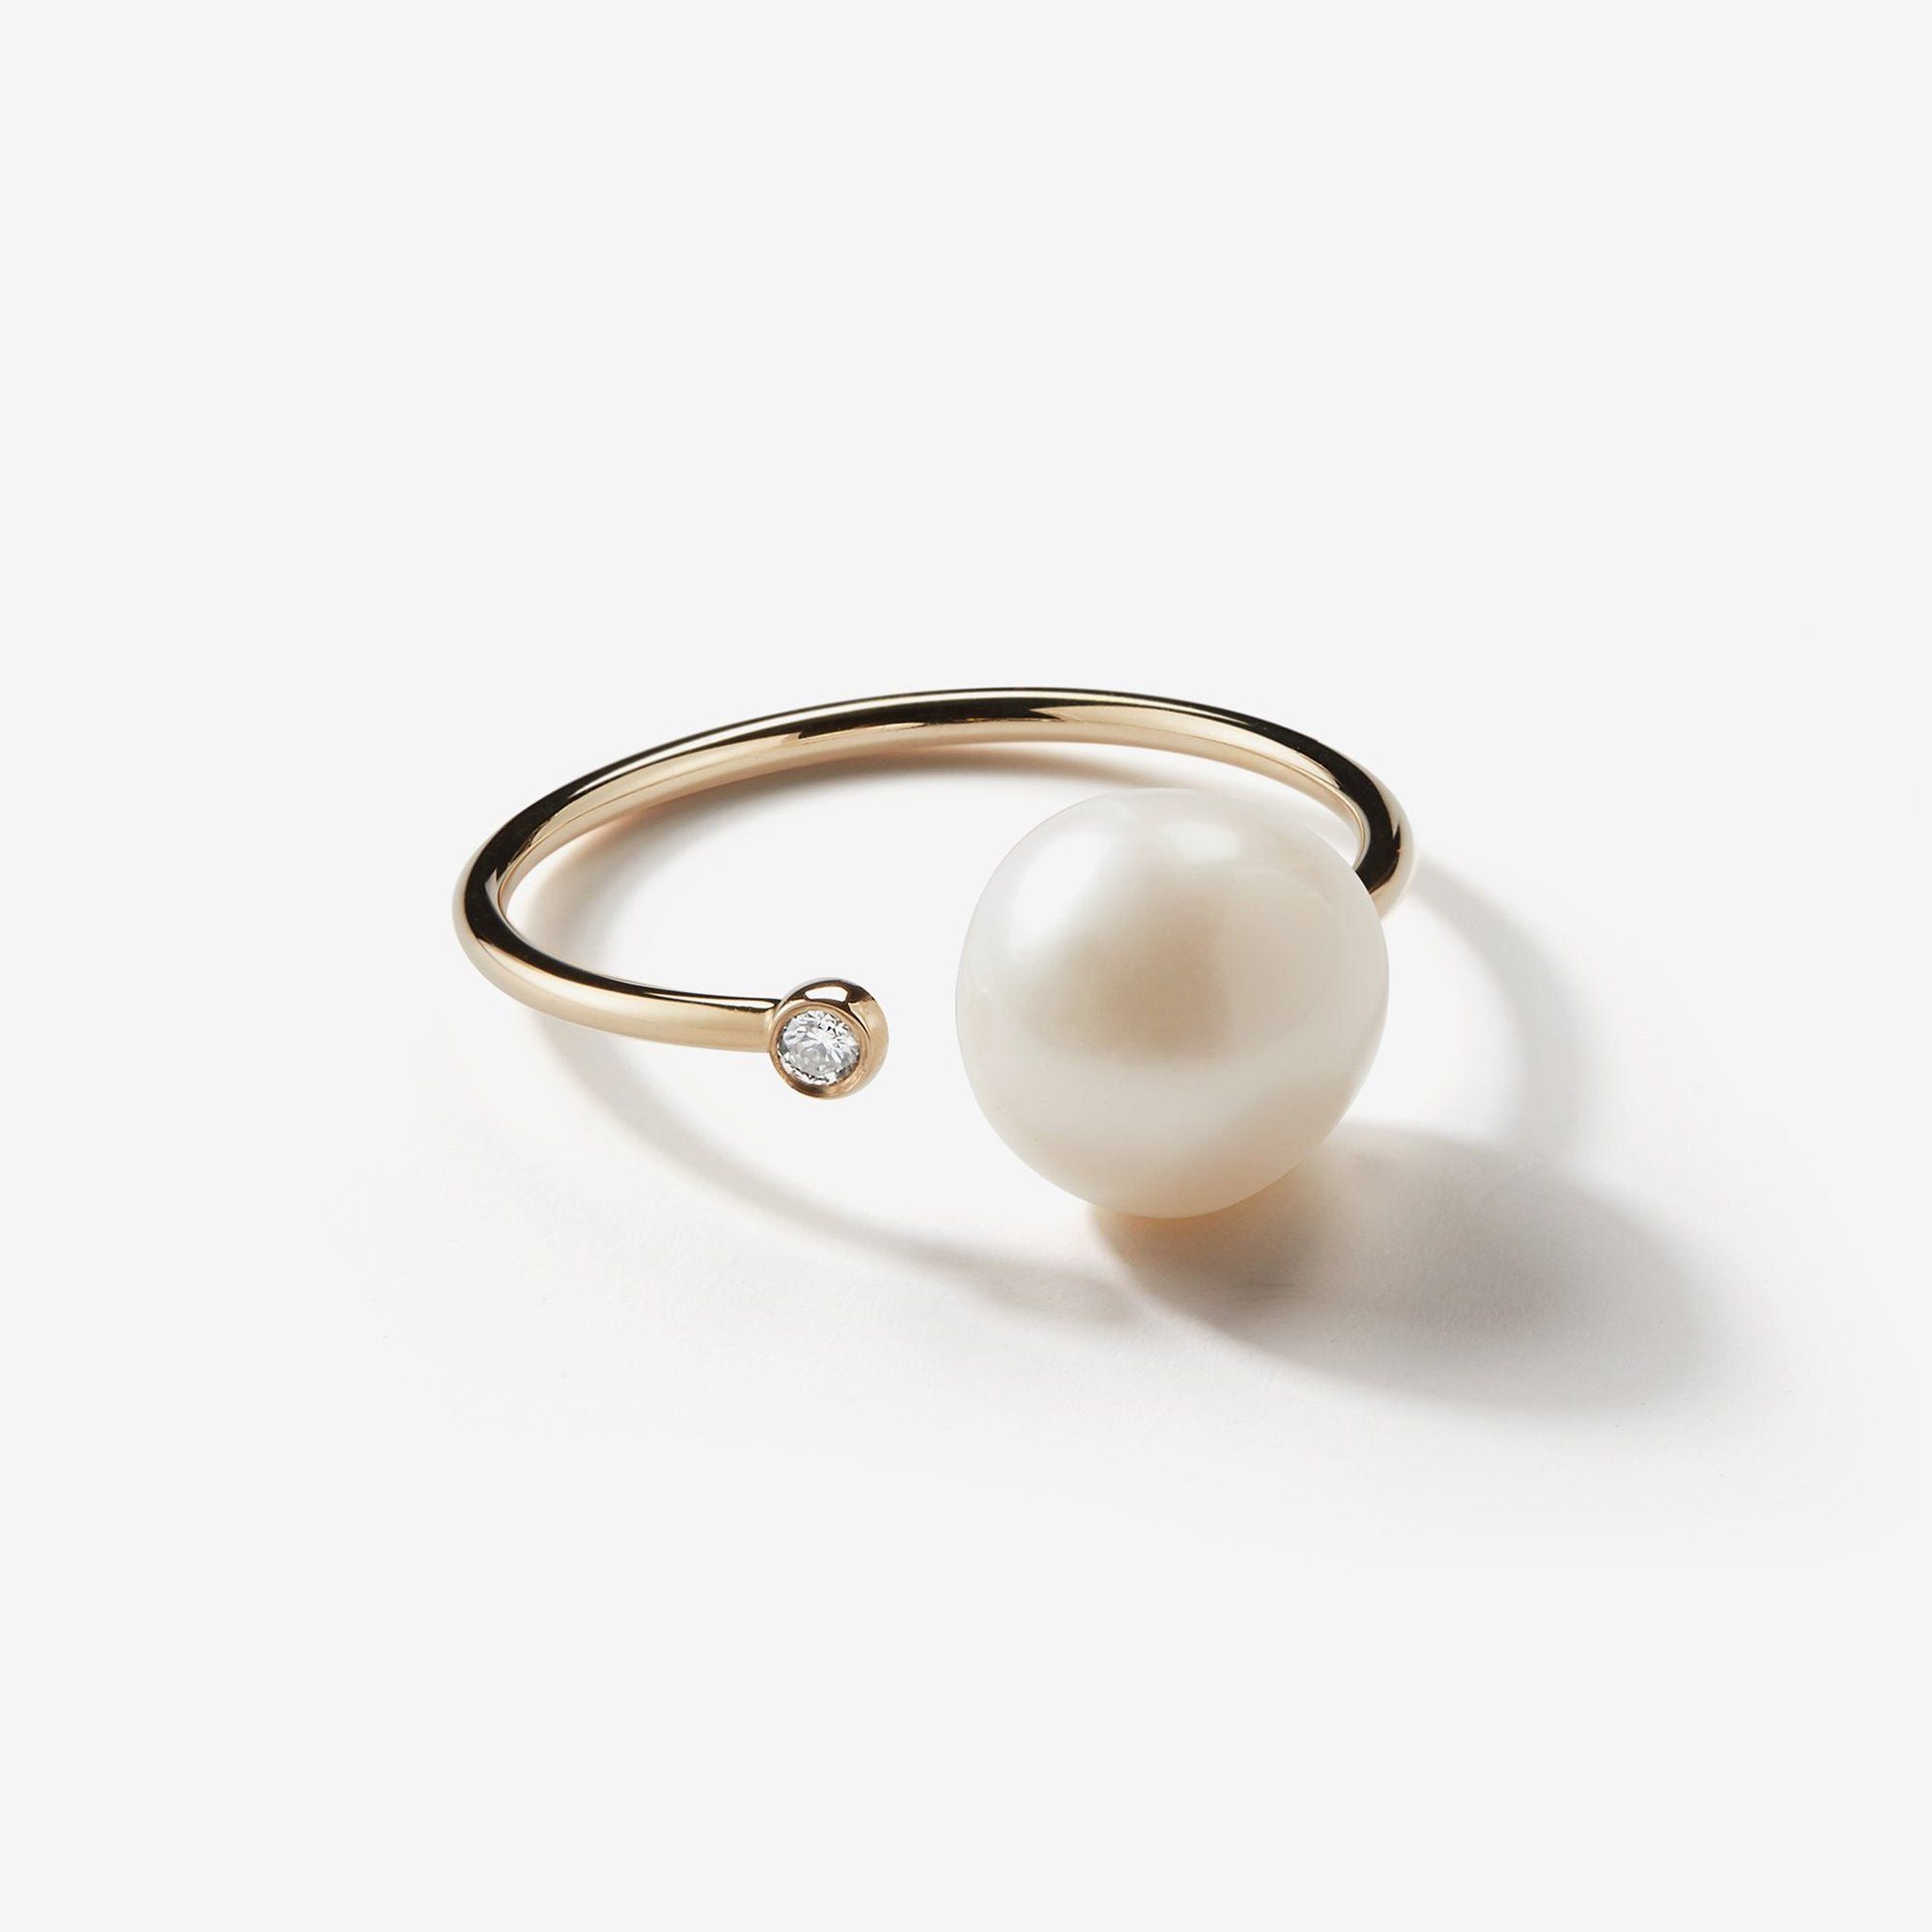 Sea of Beauty Collection. Open Diamond and White Pearl Thin Ring